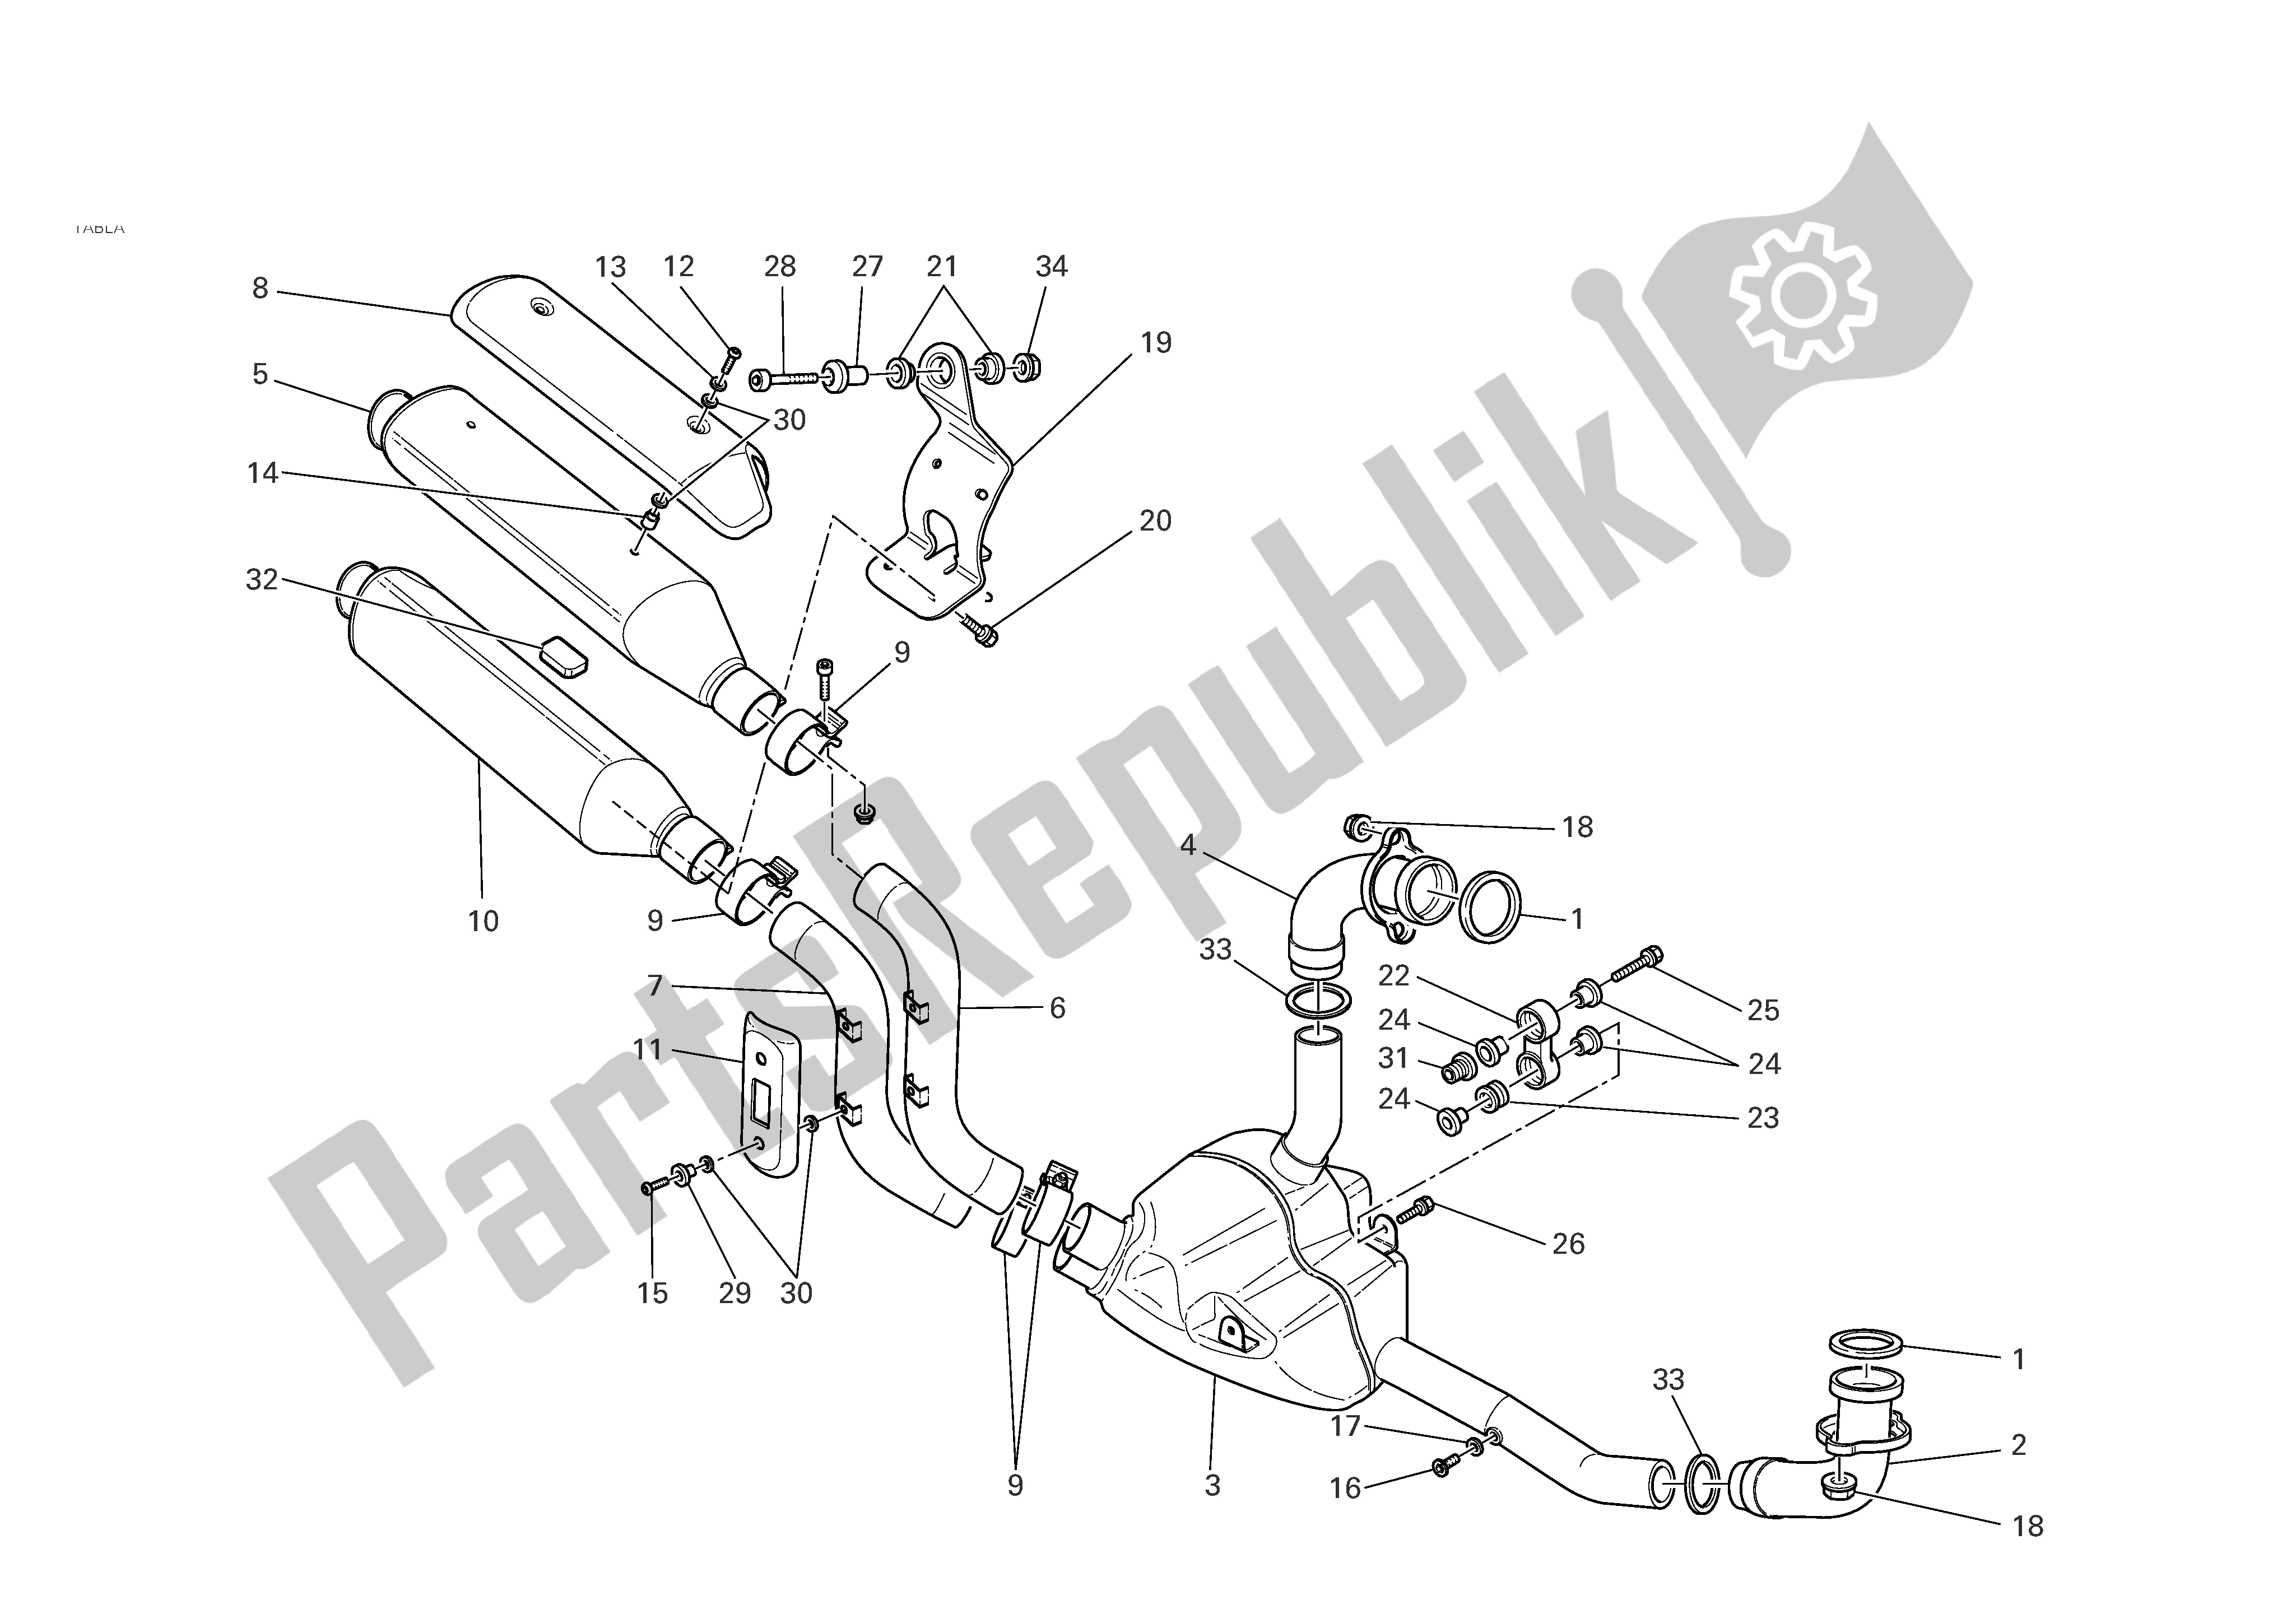 All parts for the Exhaust System of the Ducati Monster S2R 800 2005